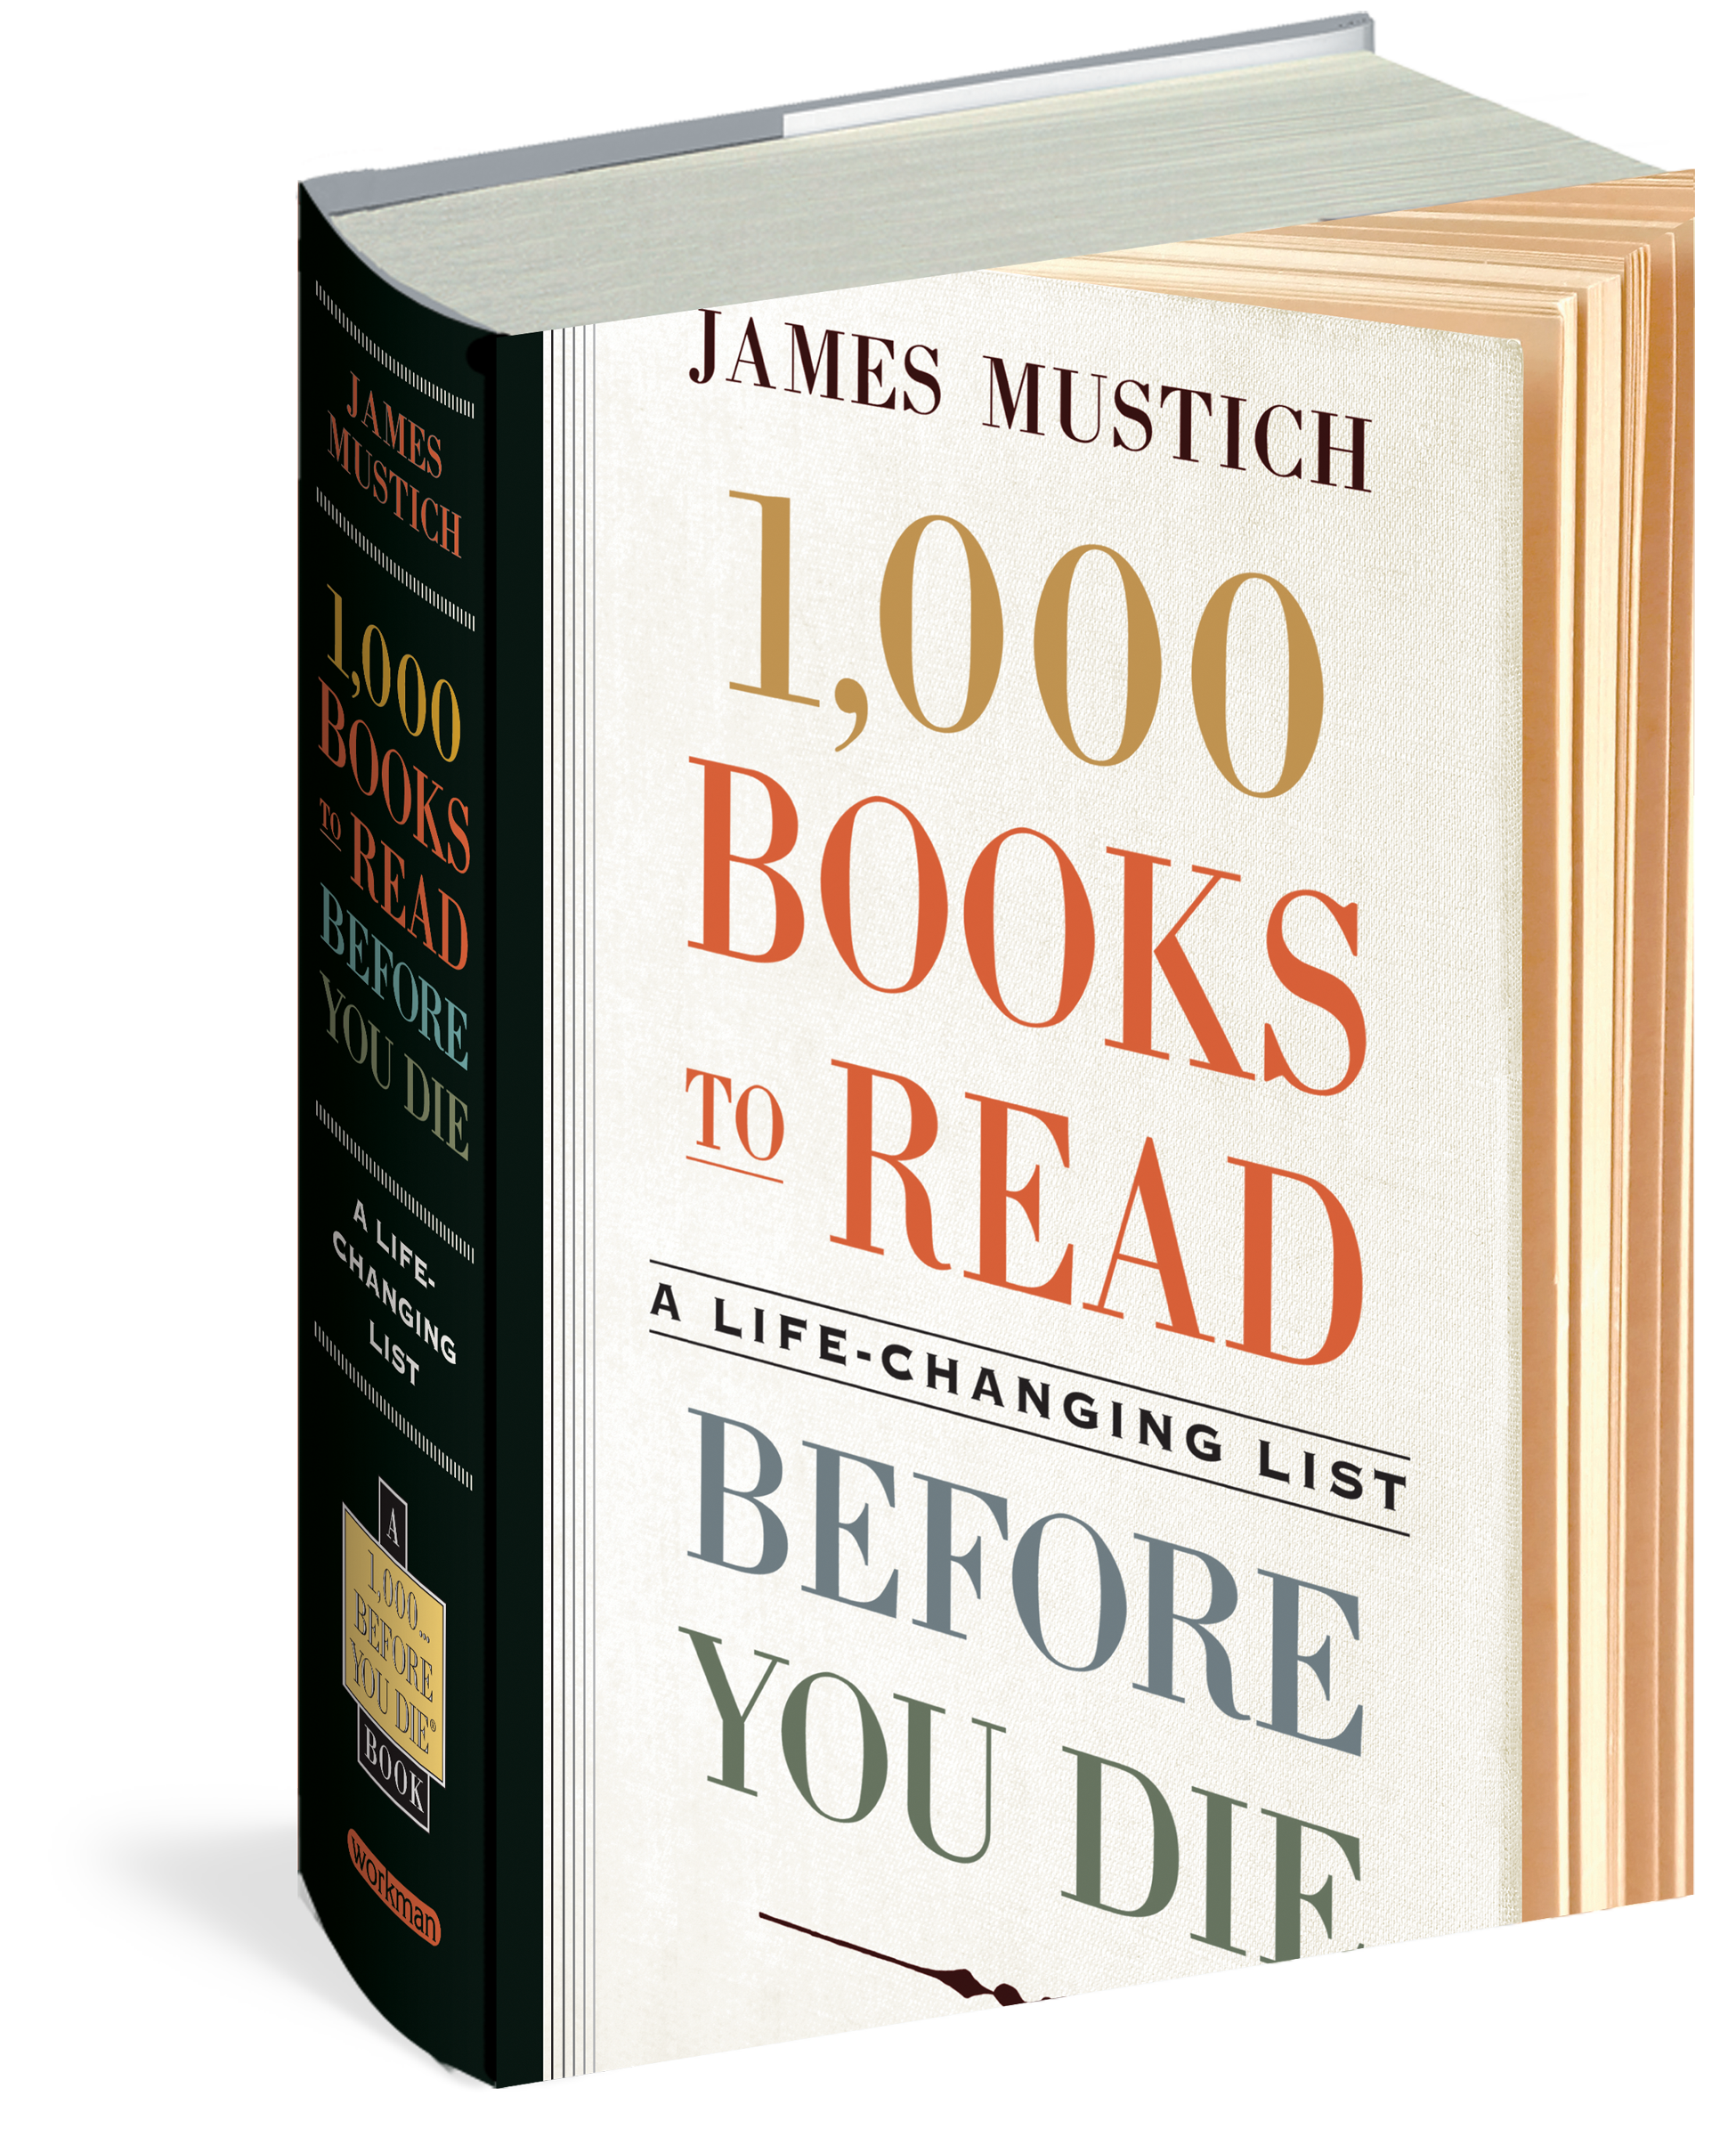 1,000 Books to Read Before You Die book cover